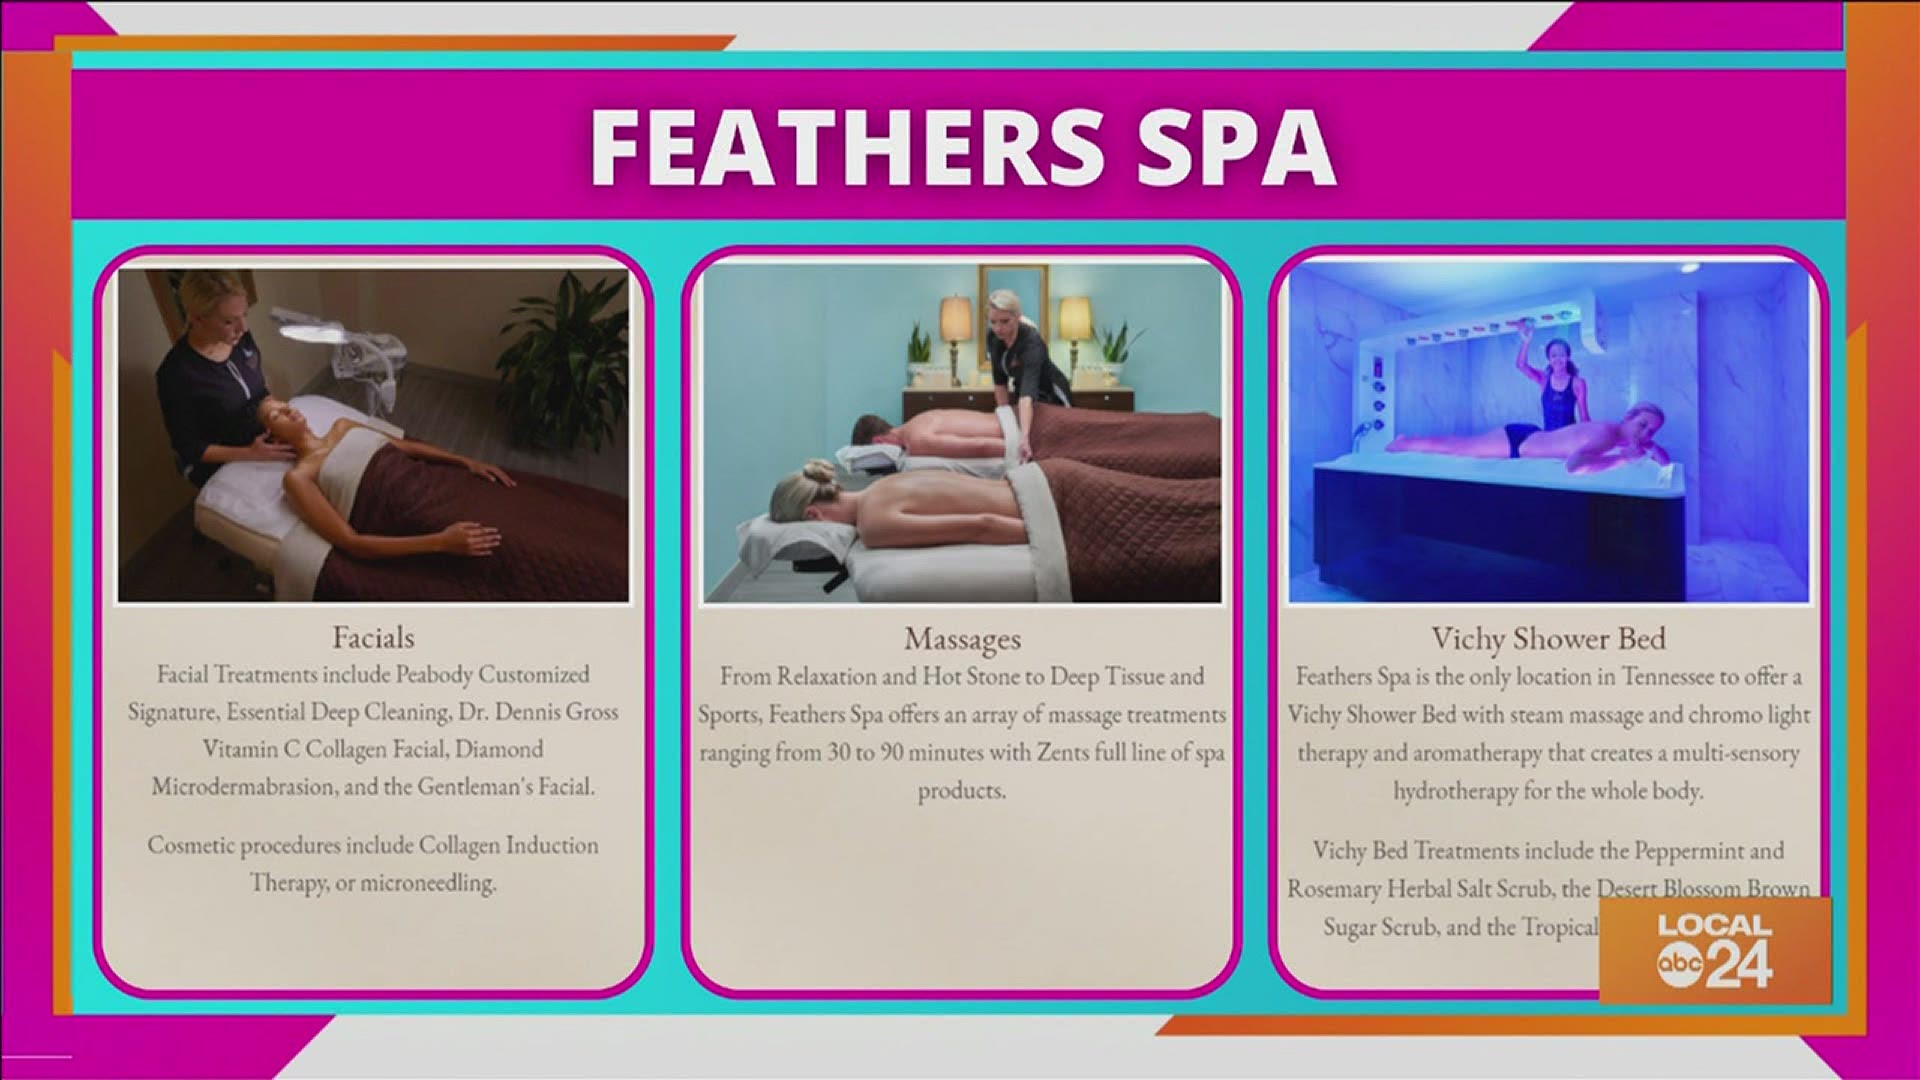 Did you know that one of the top spas in America is located in Downtown Memphis? From the Vichy Shower Bed to facials, check out what Feathers Spa has to offer!